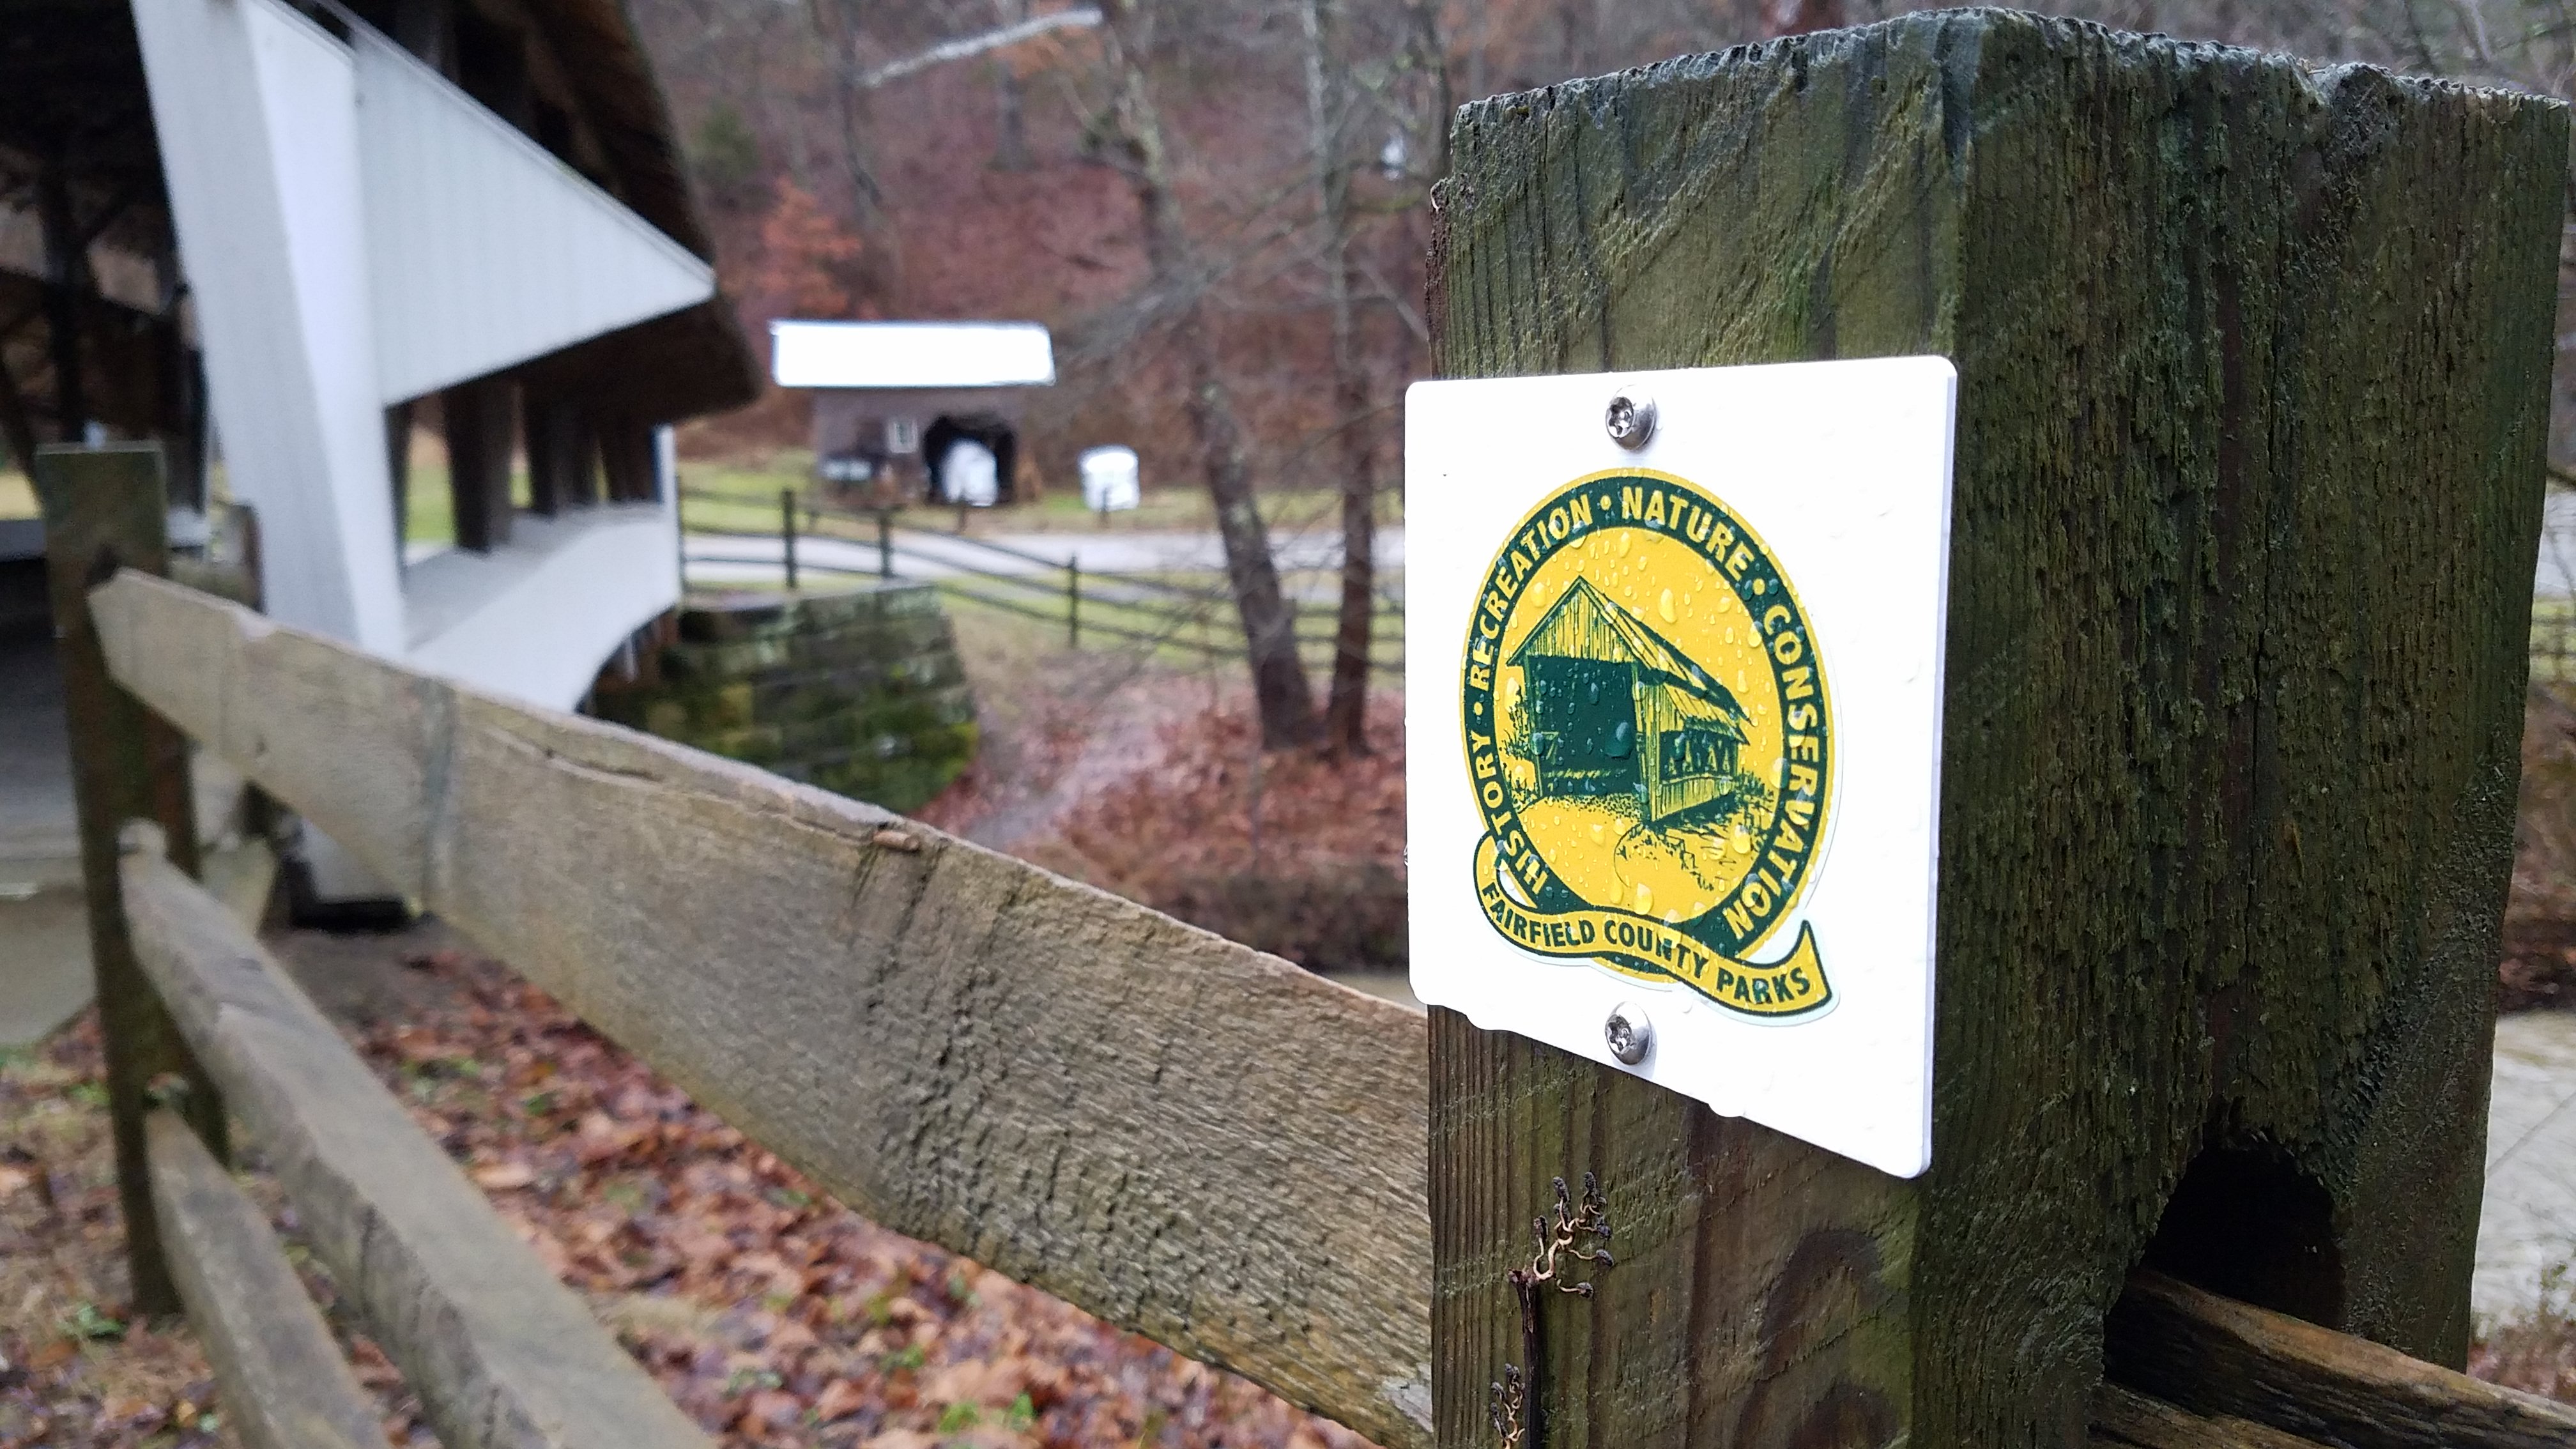 HISTORY • RECREATION • NATURE • CONSERVATION, Bridge, Covered, Fairfield County, Forest, HQ Photo